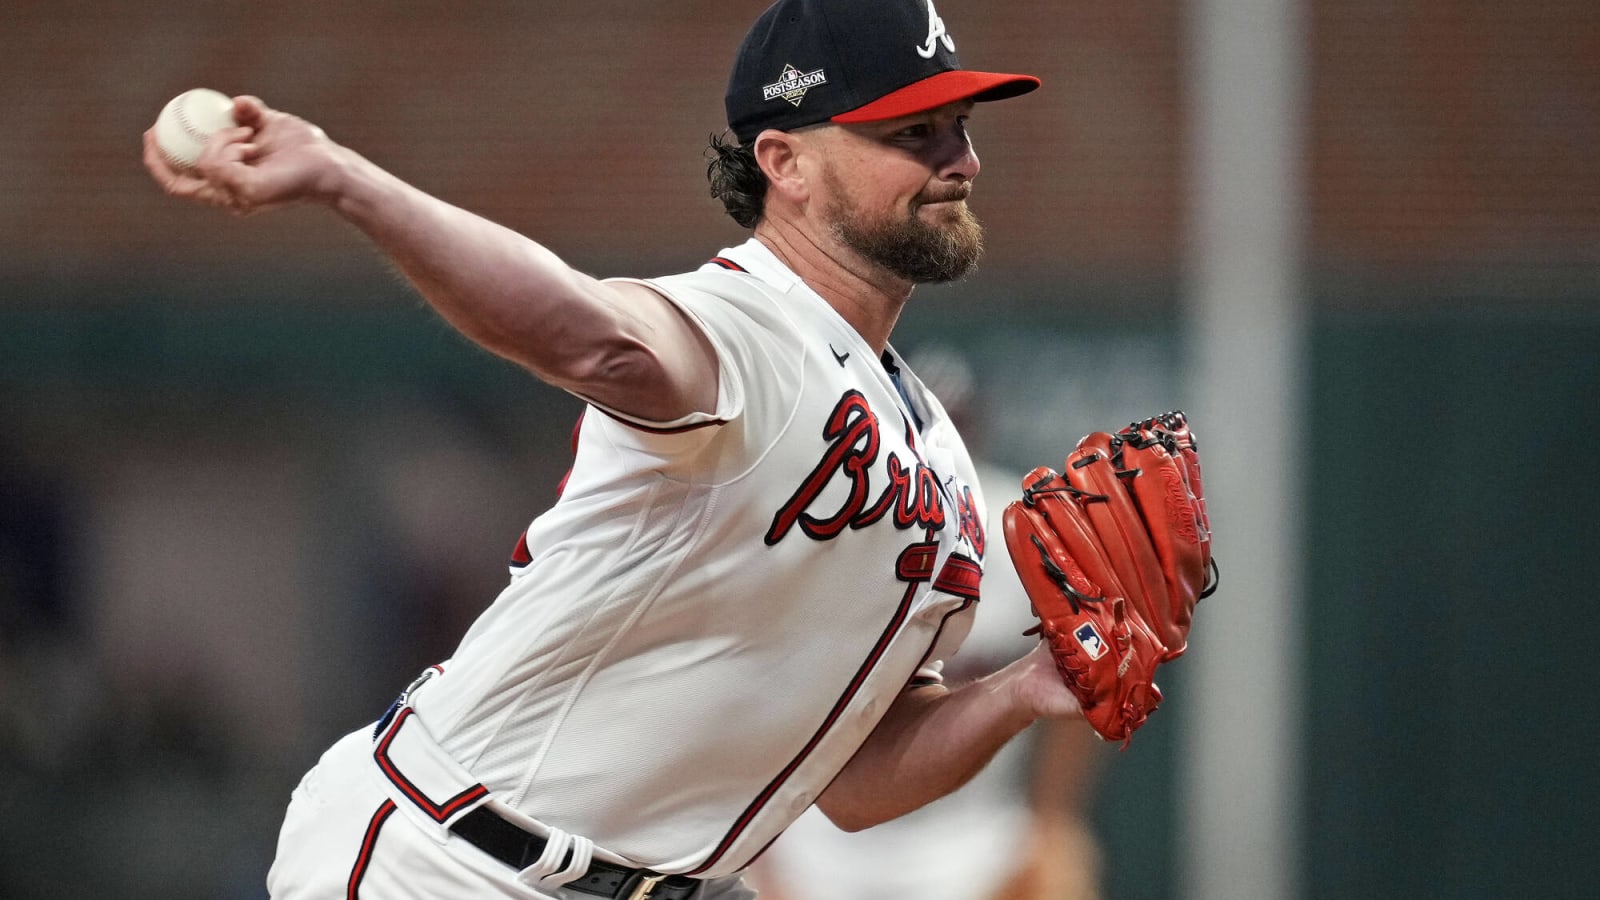 Report: Braves expected to decline Kirby Yates’ option